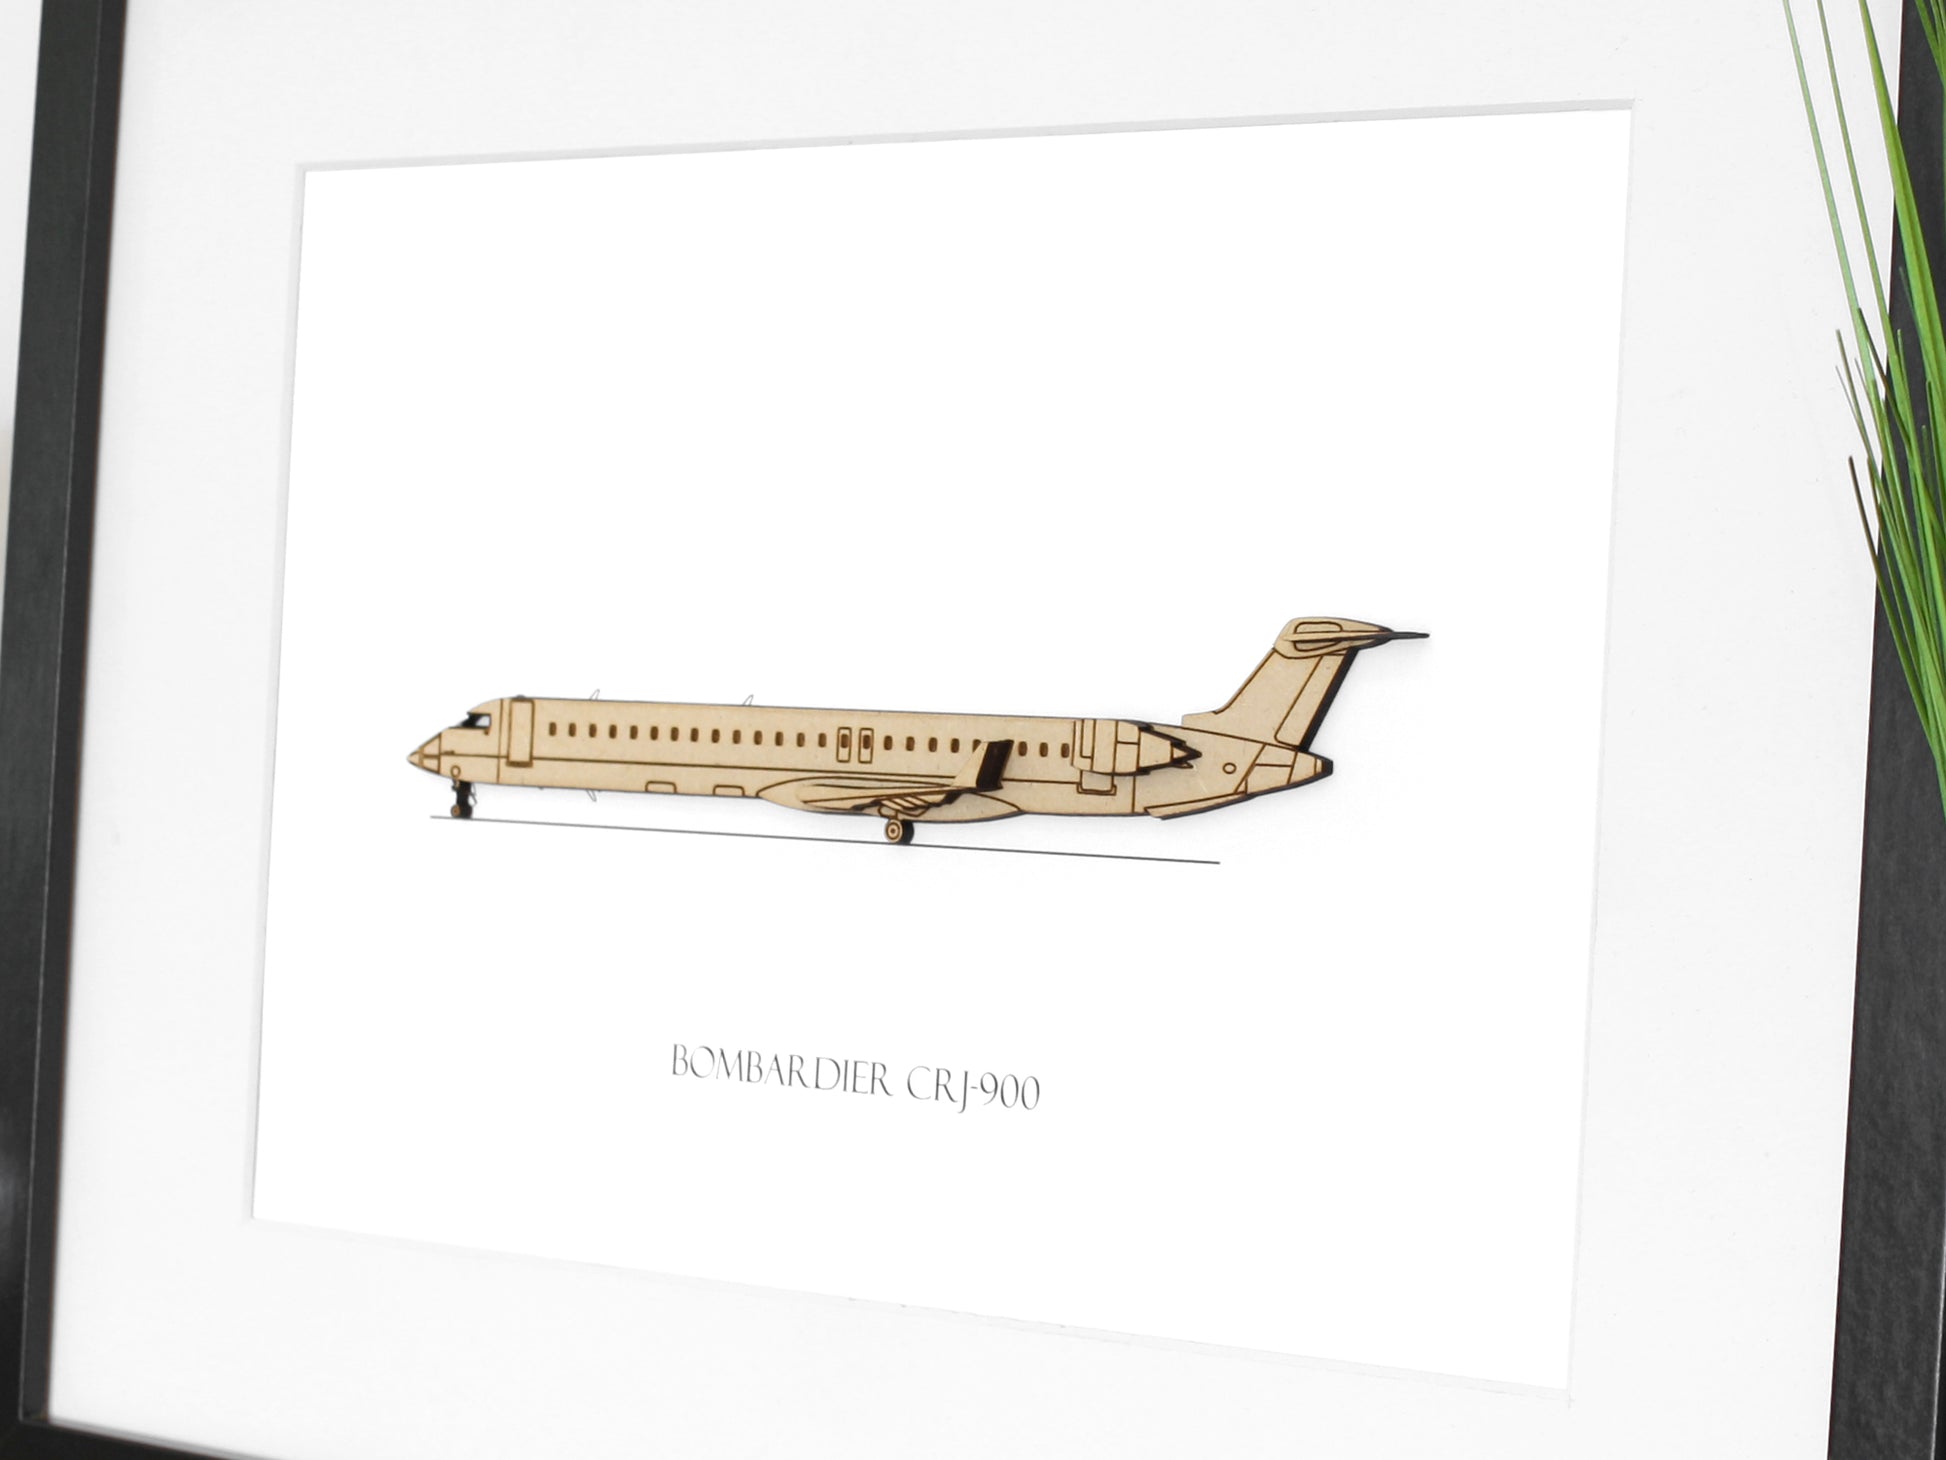 Bombardier CJR900 aviation gifts